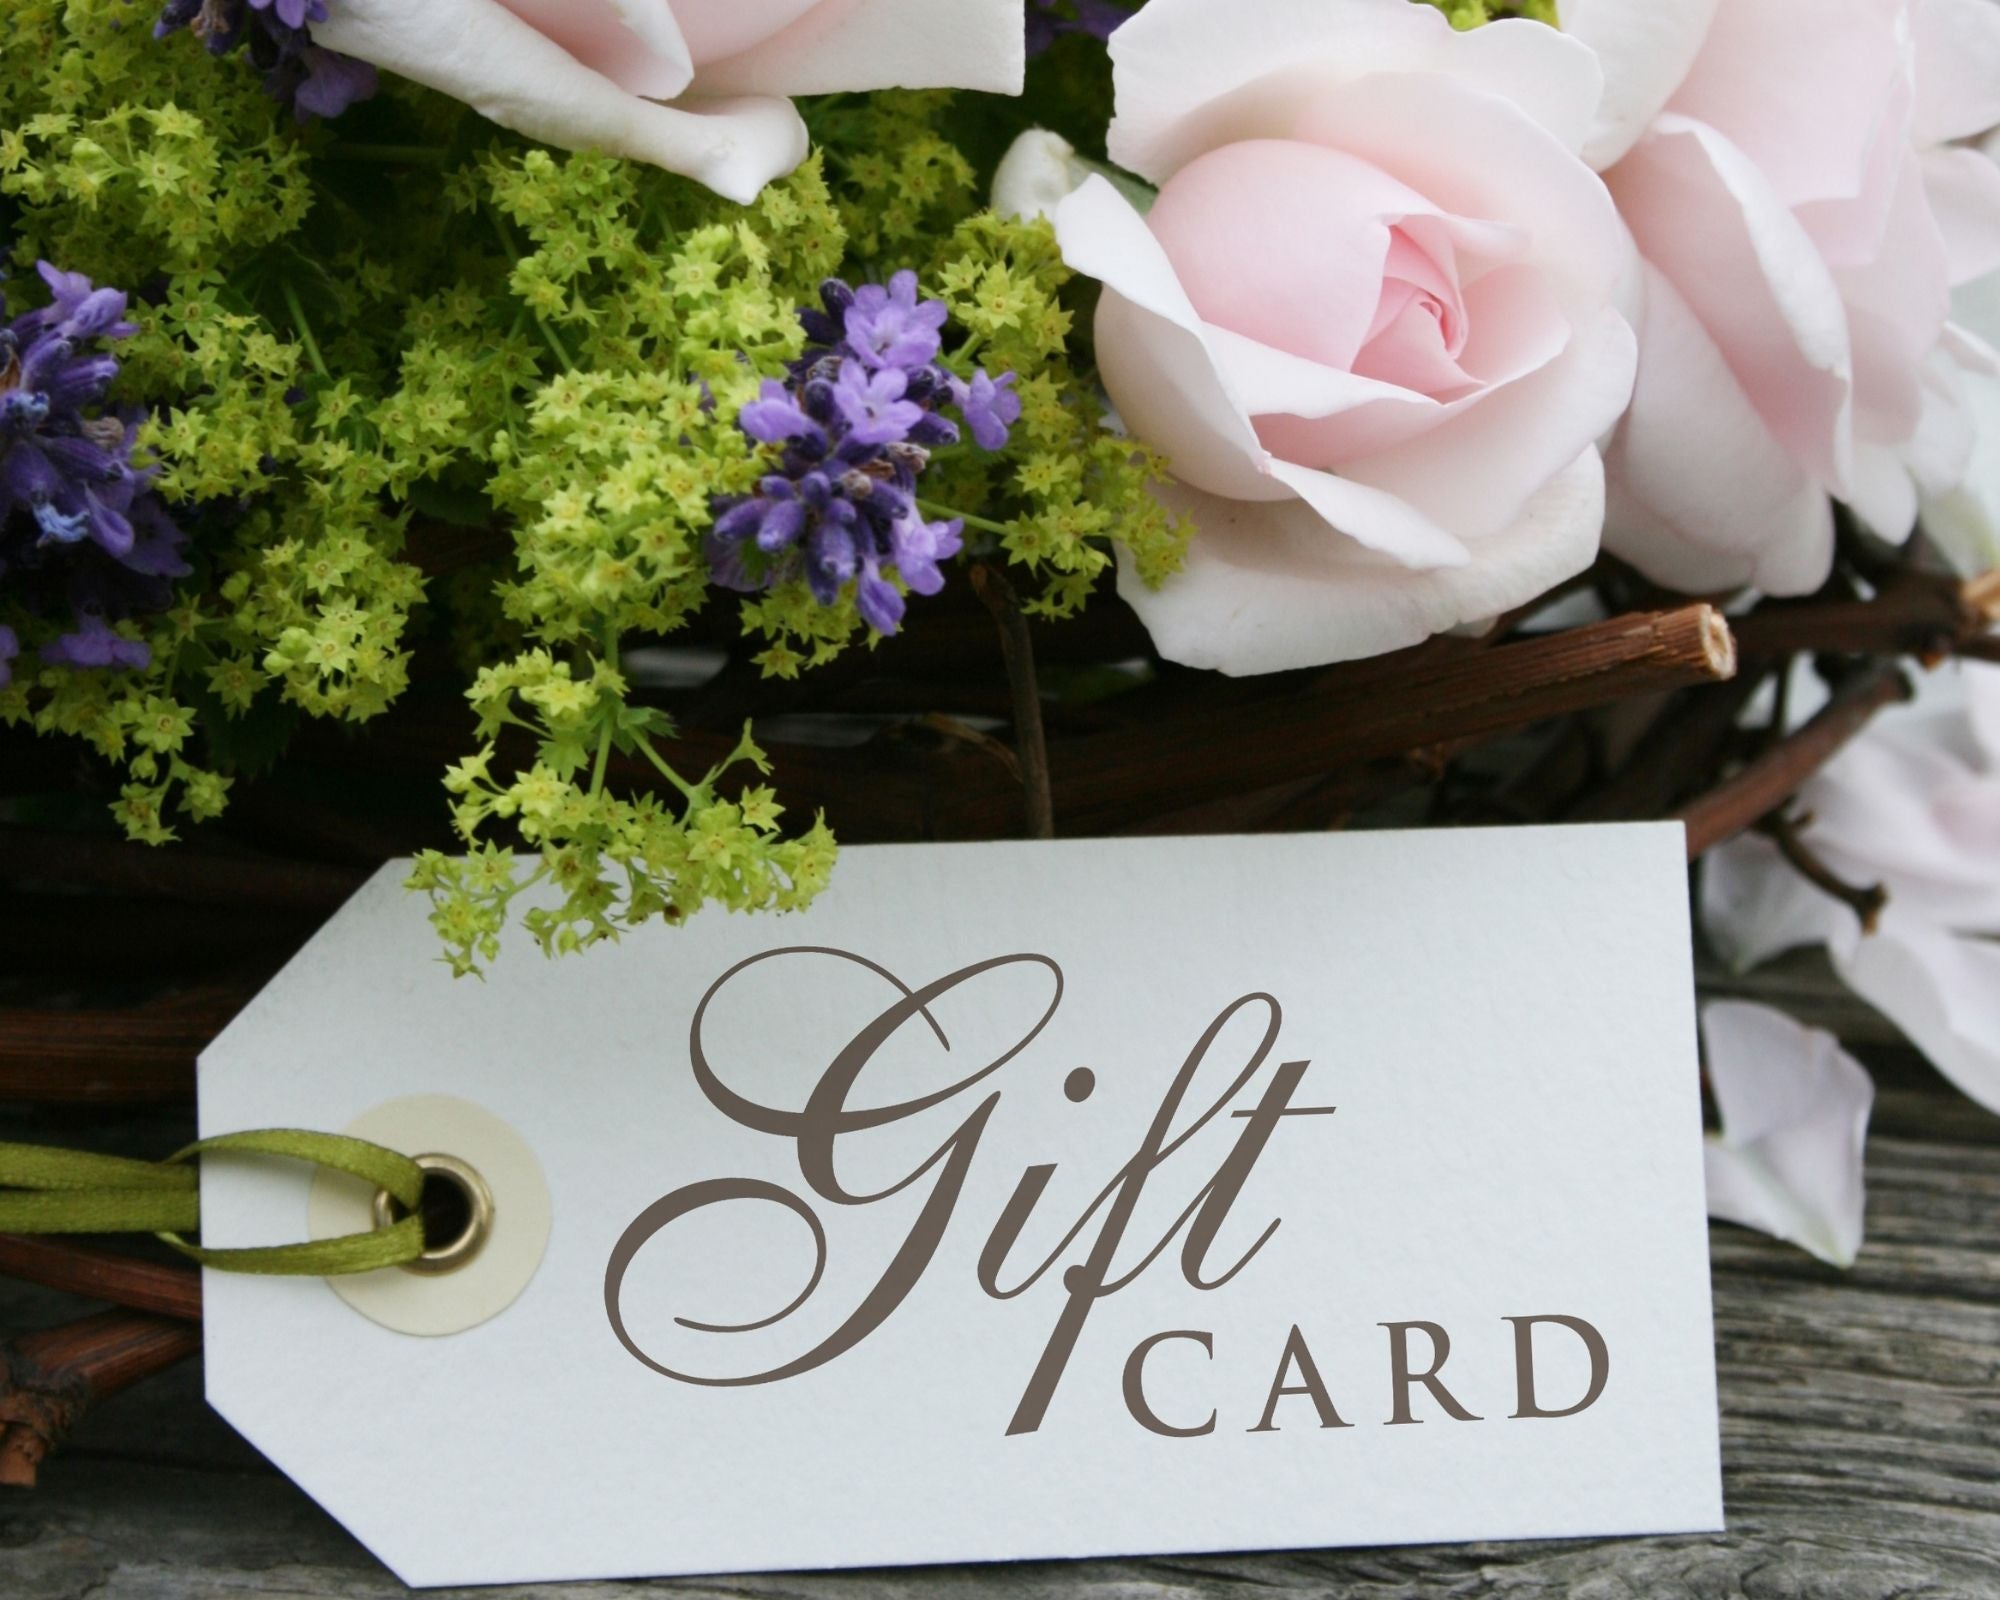 The COEO Gift Card